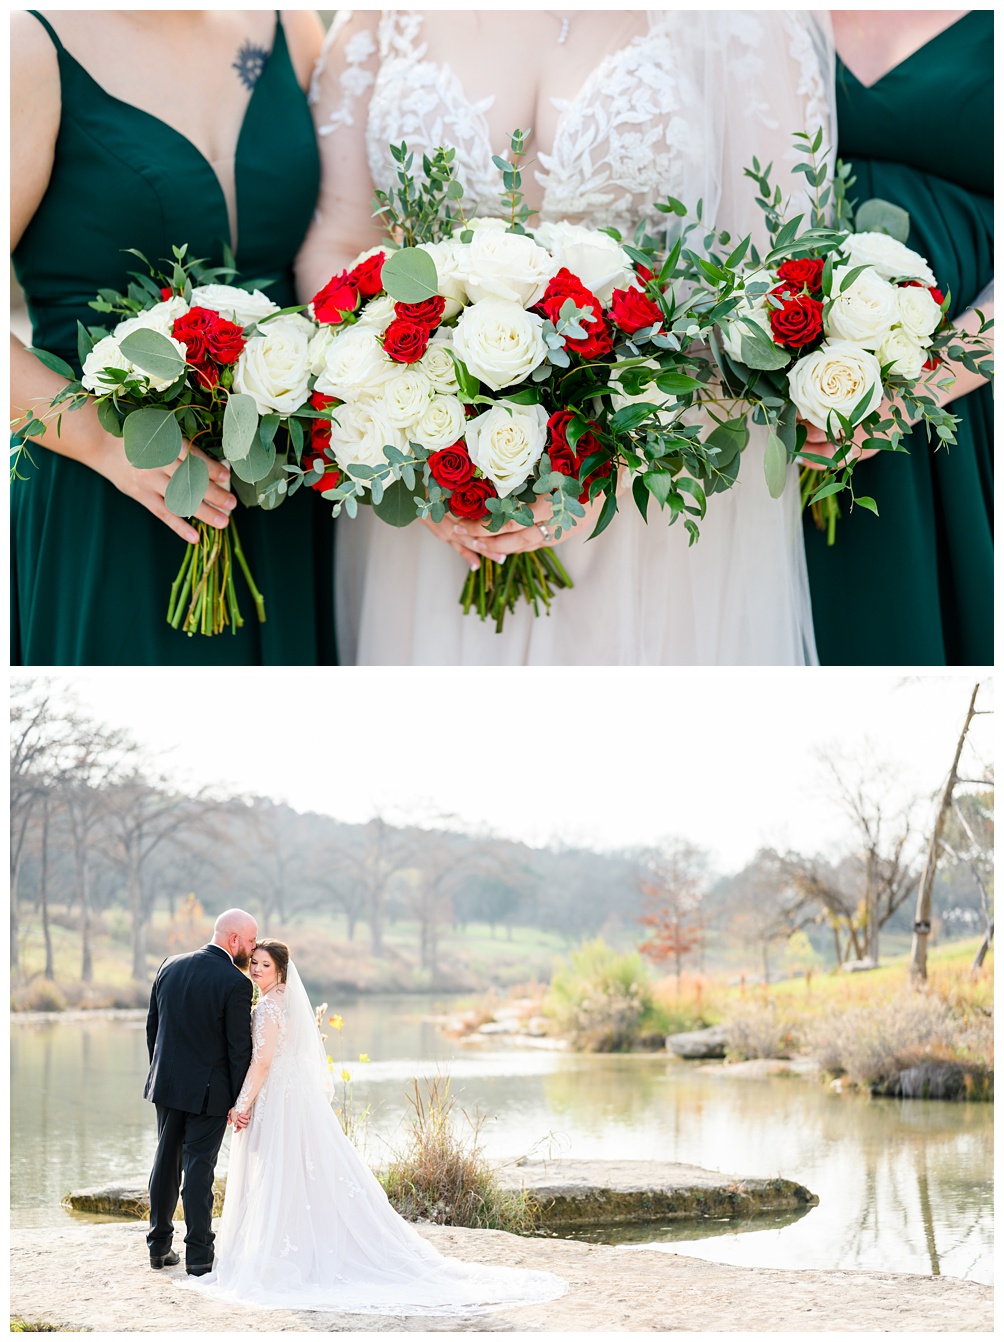 The Waters Point Wedding Photographer in Wimberley Texas with Wow Factor Floral bridesmaids bouquets in white against hunter green dresses